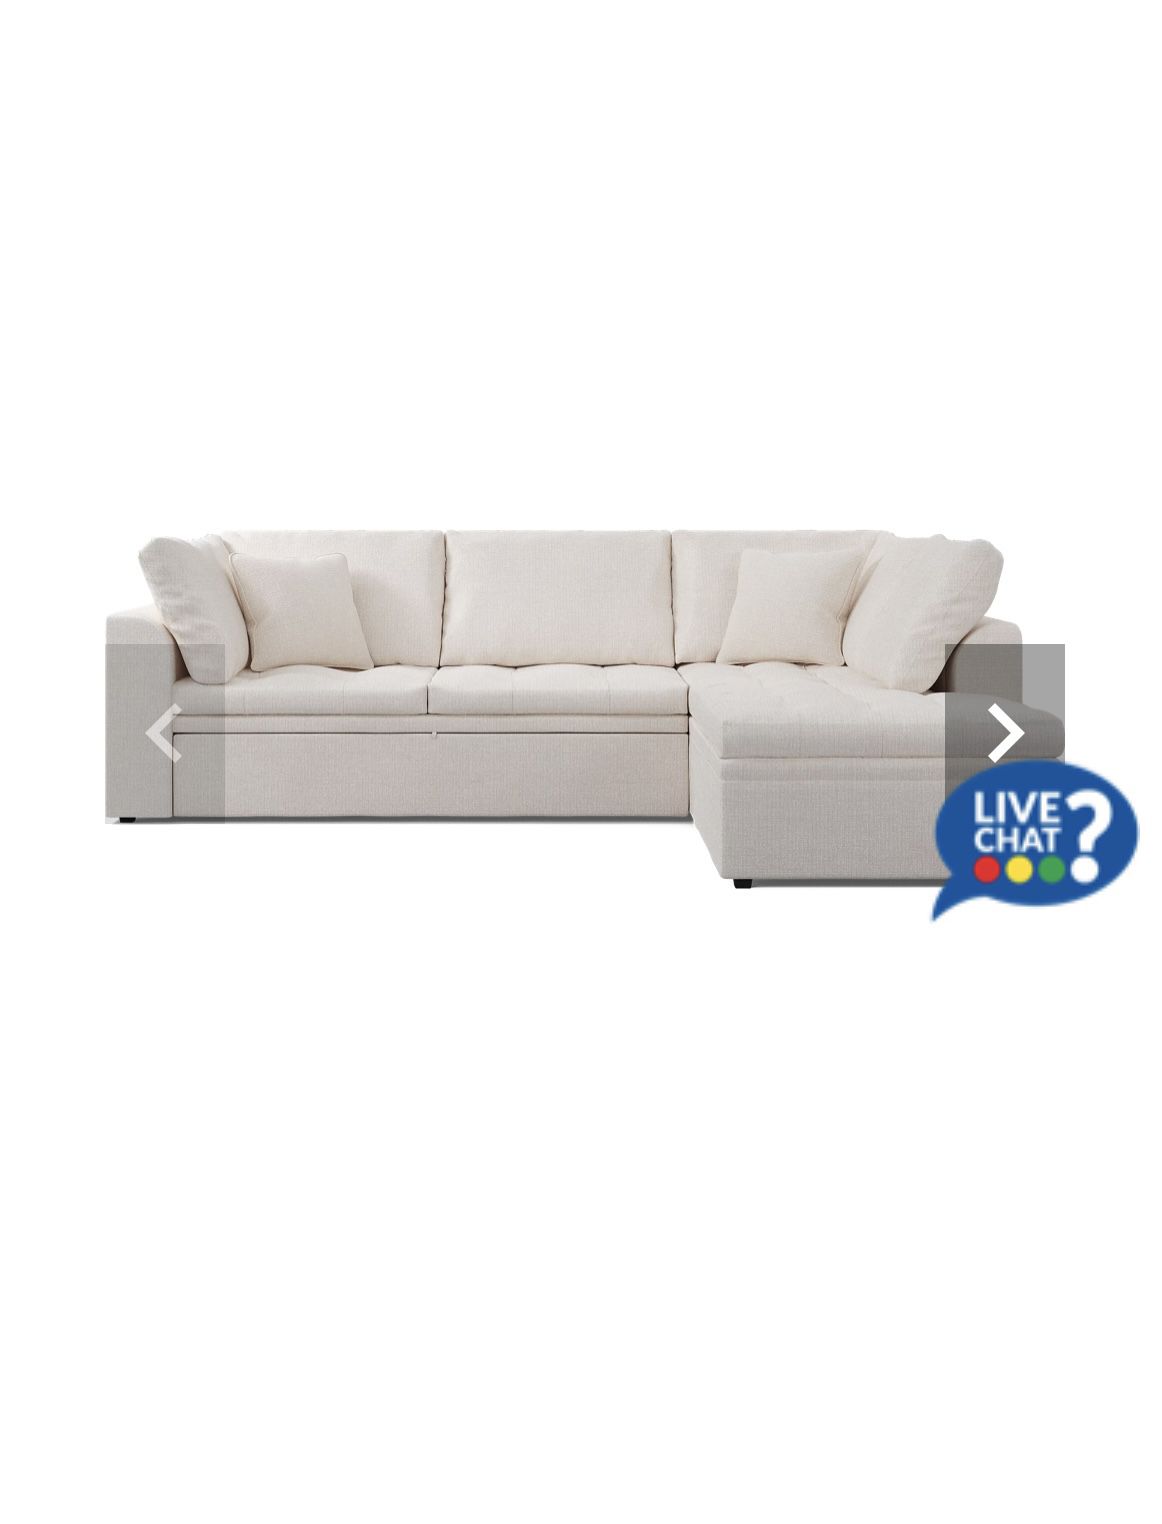 L Shaped Couch Sleeper Sectional 